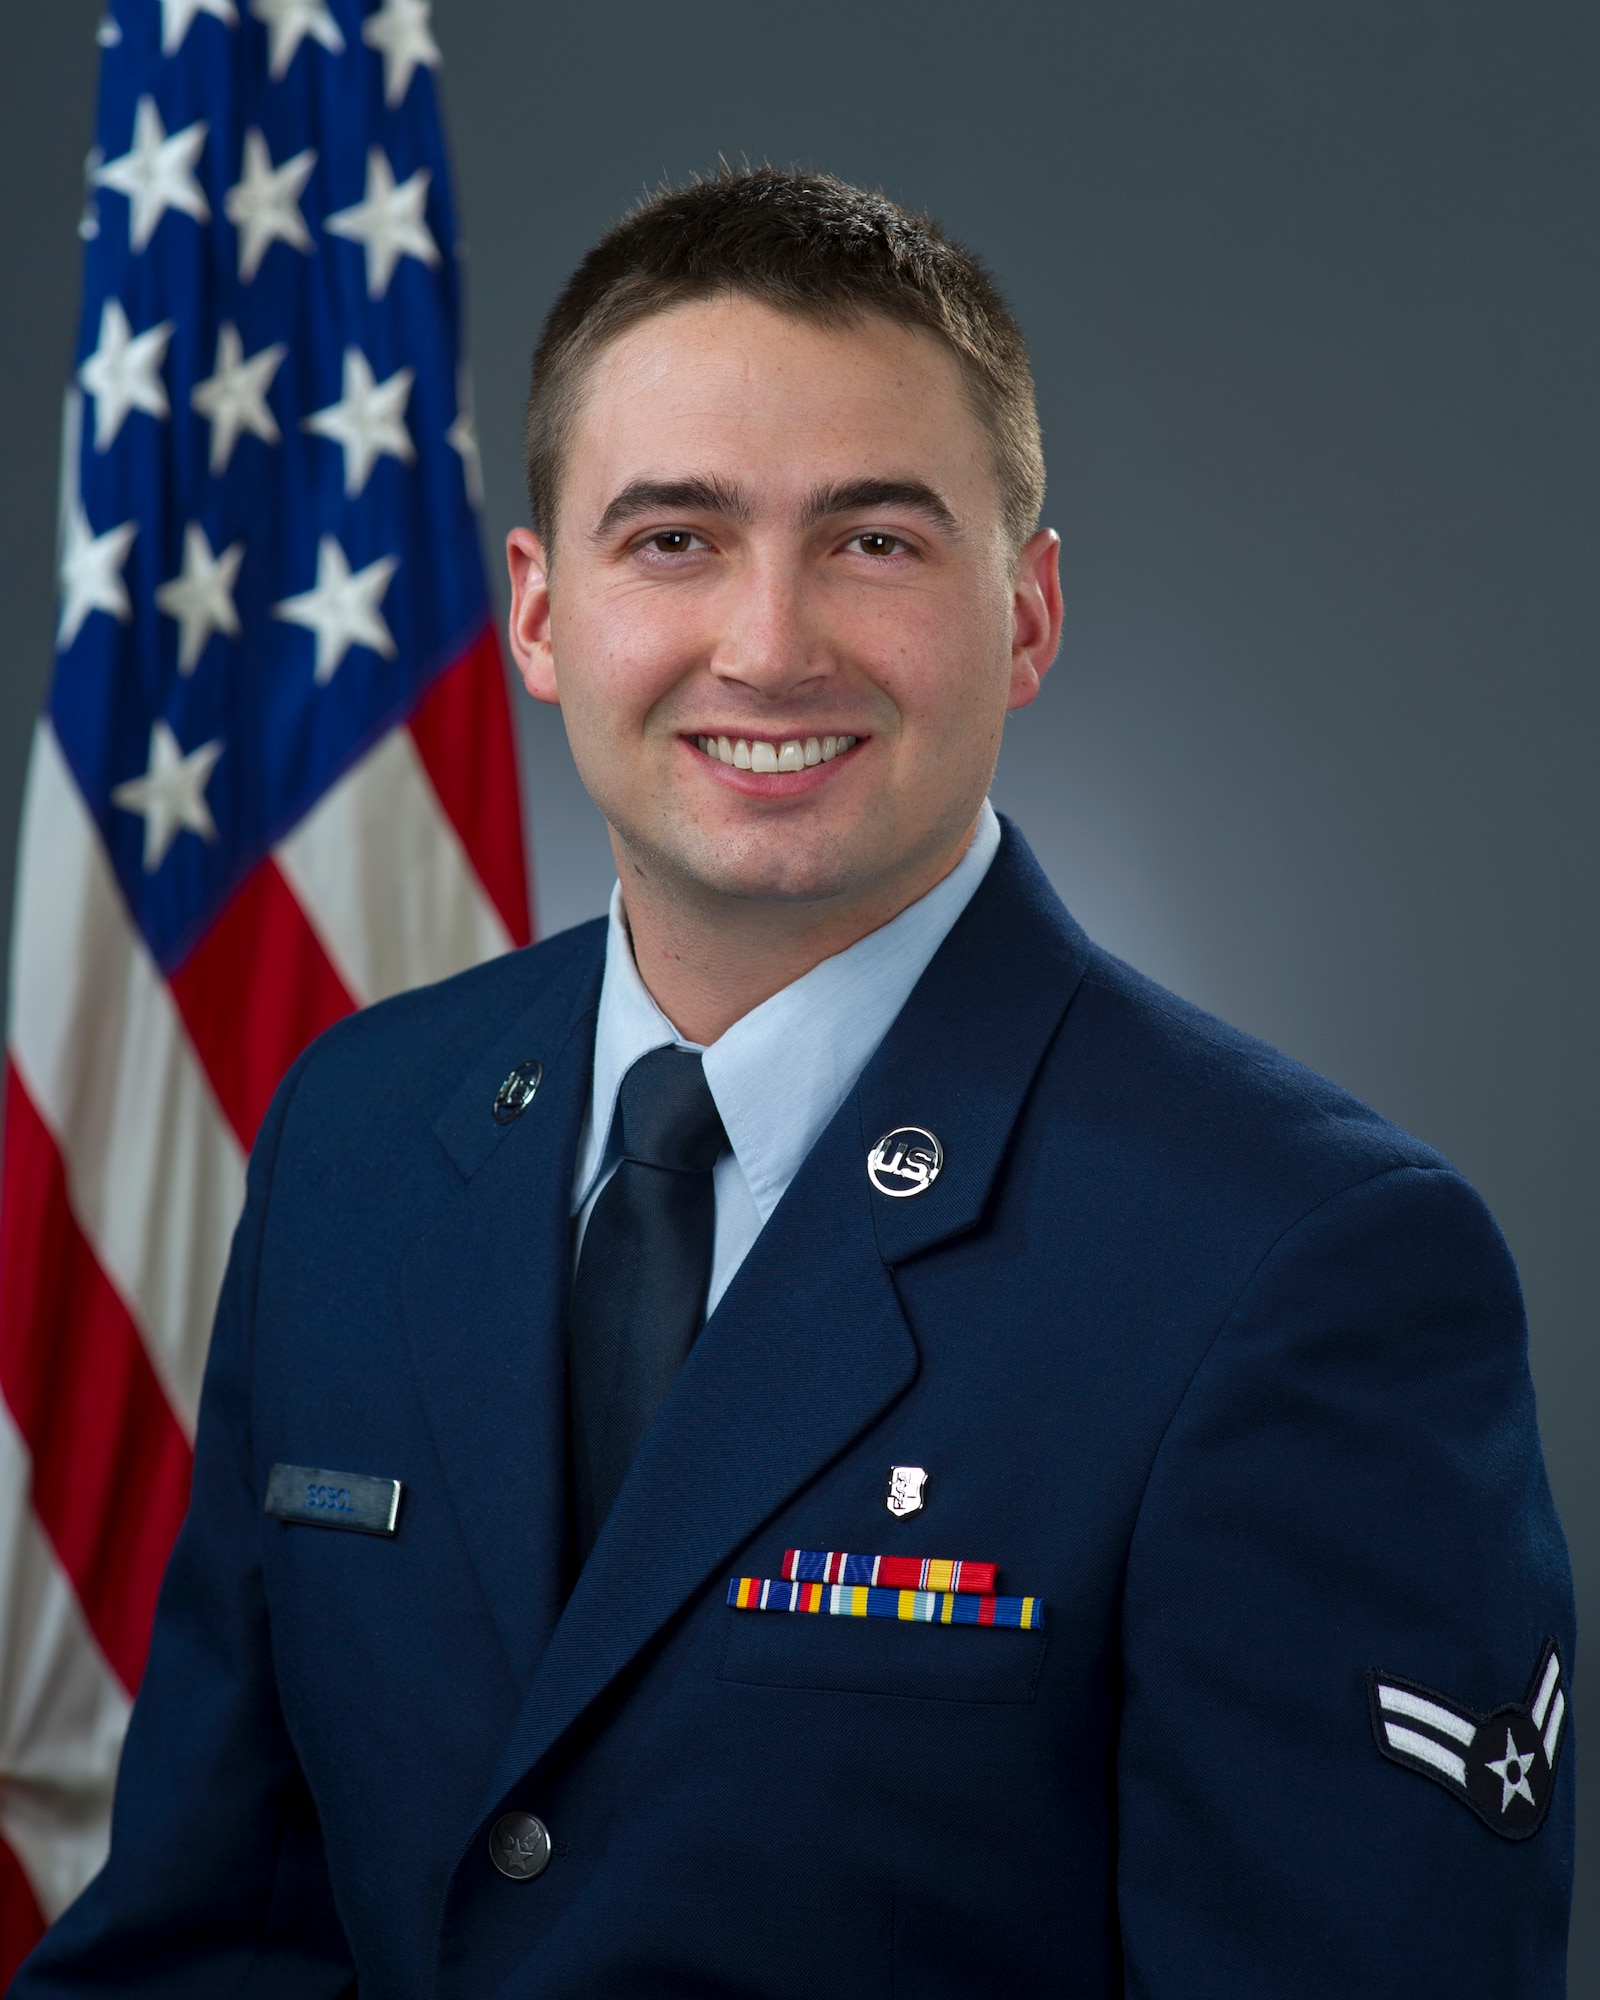 Commentary by Airman 1st Class Colin Sobol